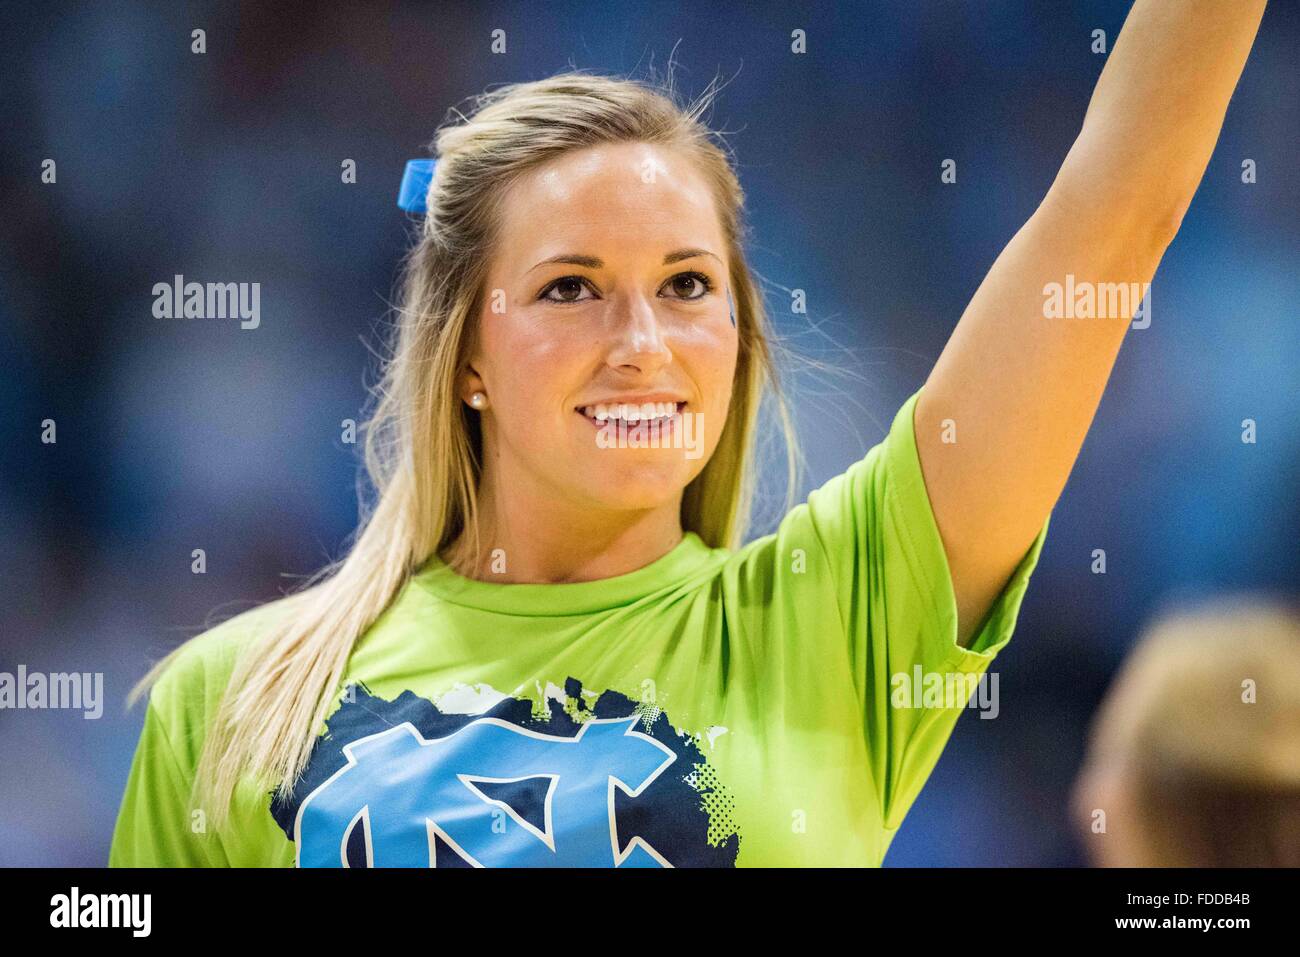 Unc tar heels cheerleader hi-res stock photography and images - Alamy